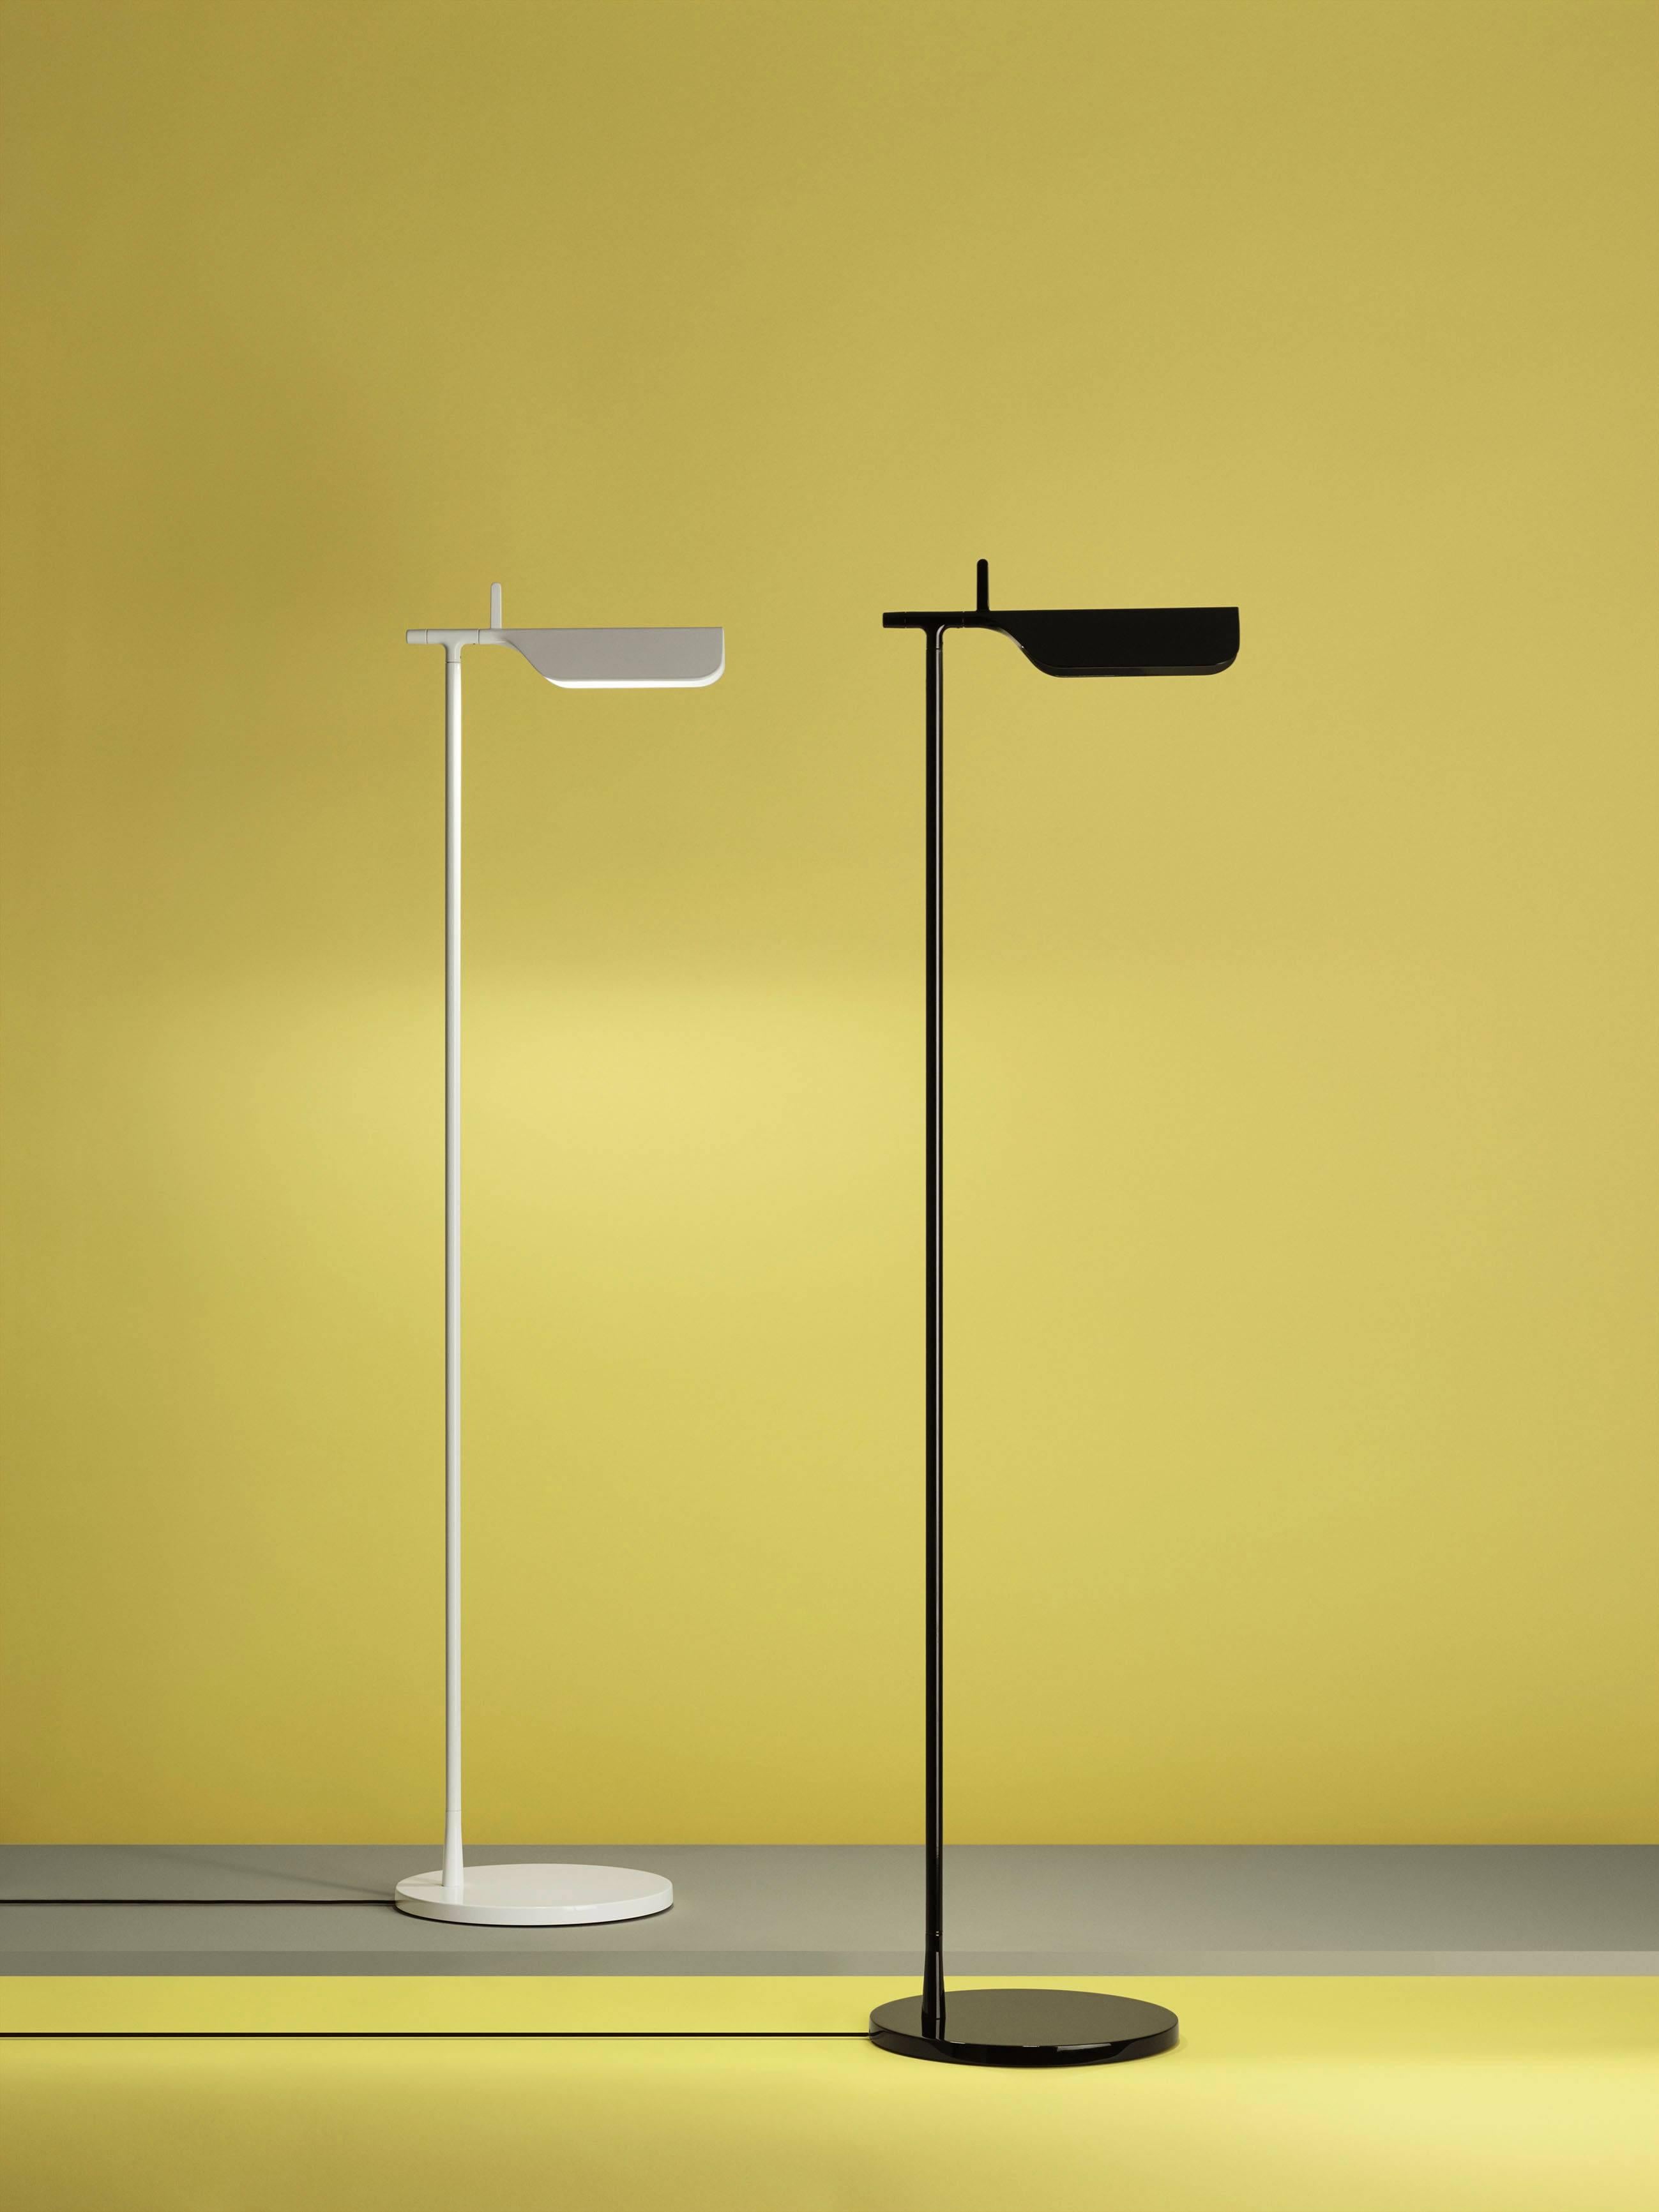 Brought to life by the design duo of E. Barber and J. Osgerby in 2011, the Tab F floor lamp is a tribute to the spirit of innovation. This modern floor lamp has an adjustable head with a 45-degree rotation capability and a body painted with